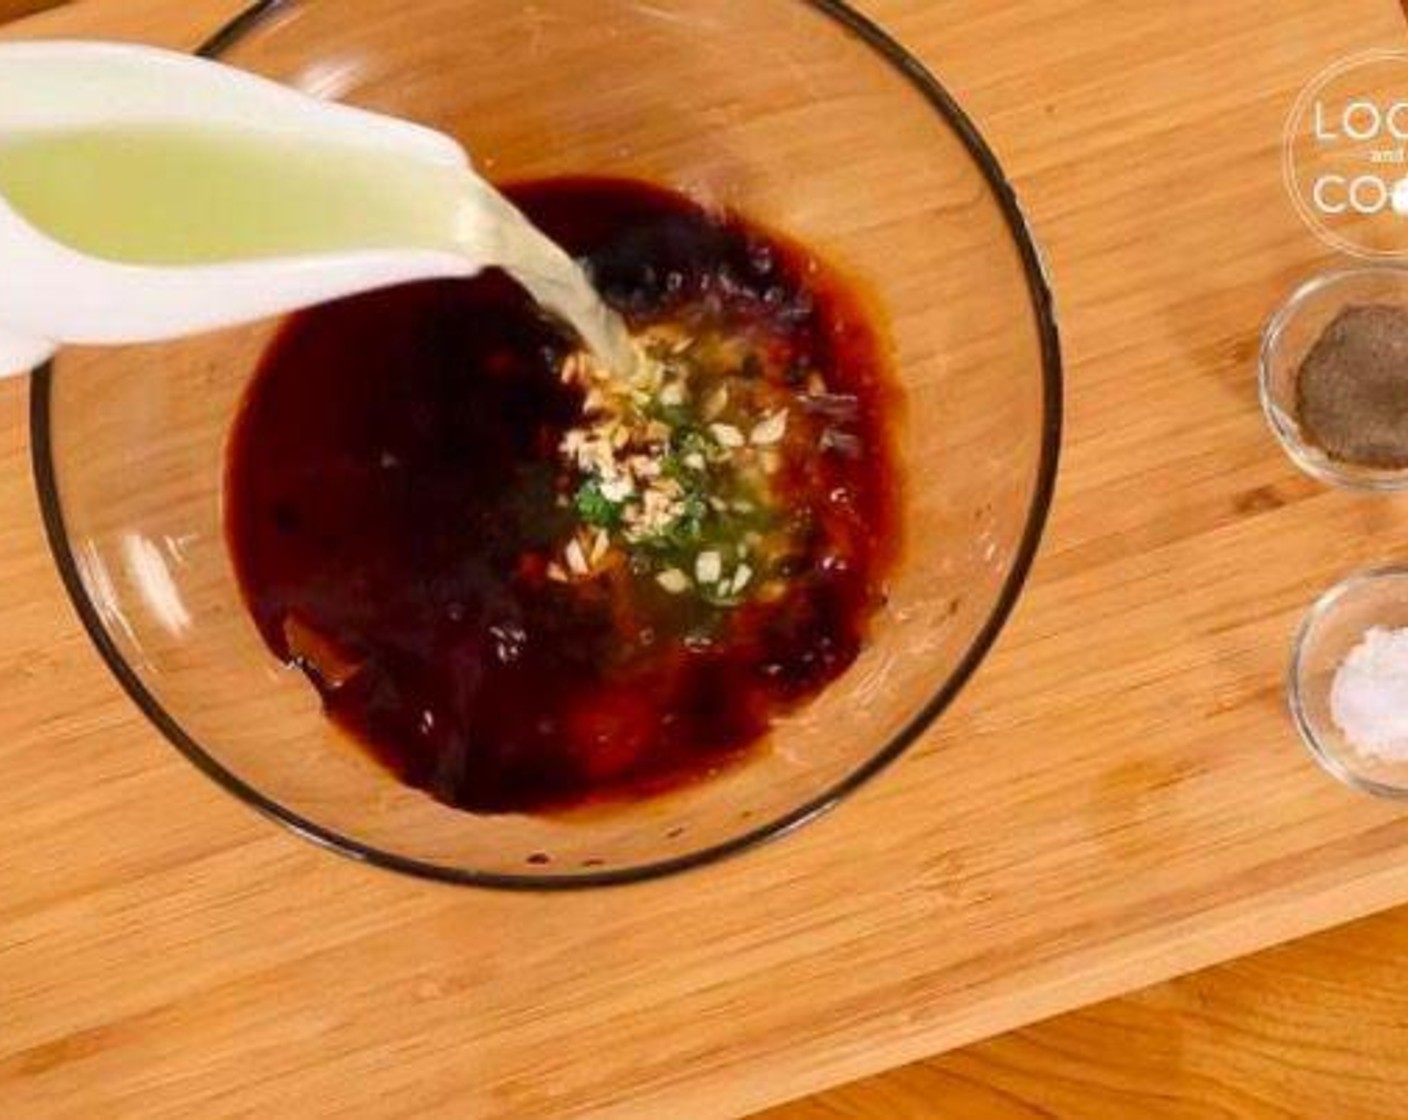 step 1 Prepare the dressing: combine Soy Sauce (2 Tbsp), juice from Limes (2), Garlic (2 cloves), Fresh Parsley (1/2 cup), Honey (1/2 cup). Add Olive Oil (1 Tbsp), Ground Black Pepper (1/4 tsp), and Salt (to taste).